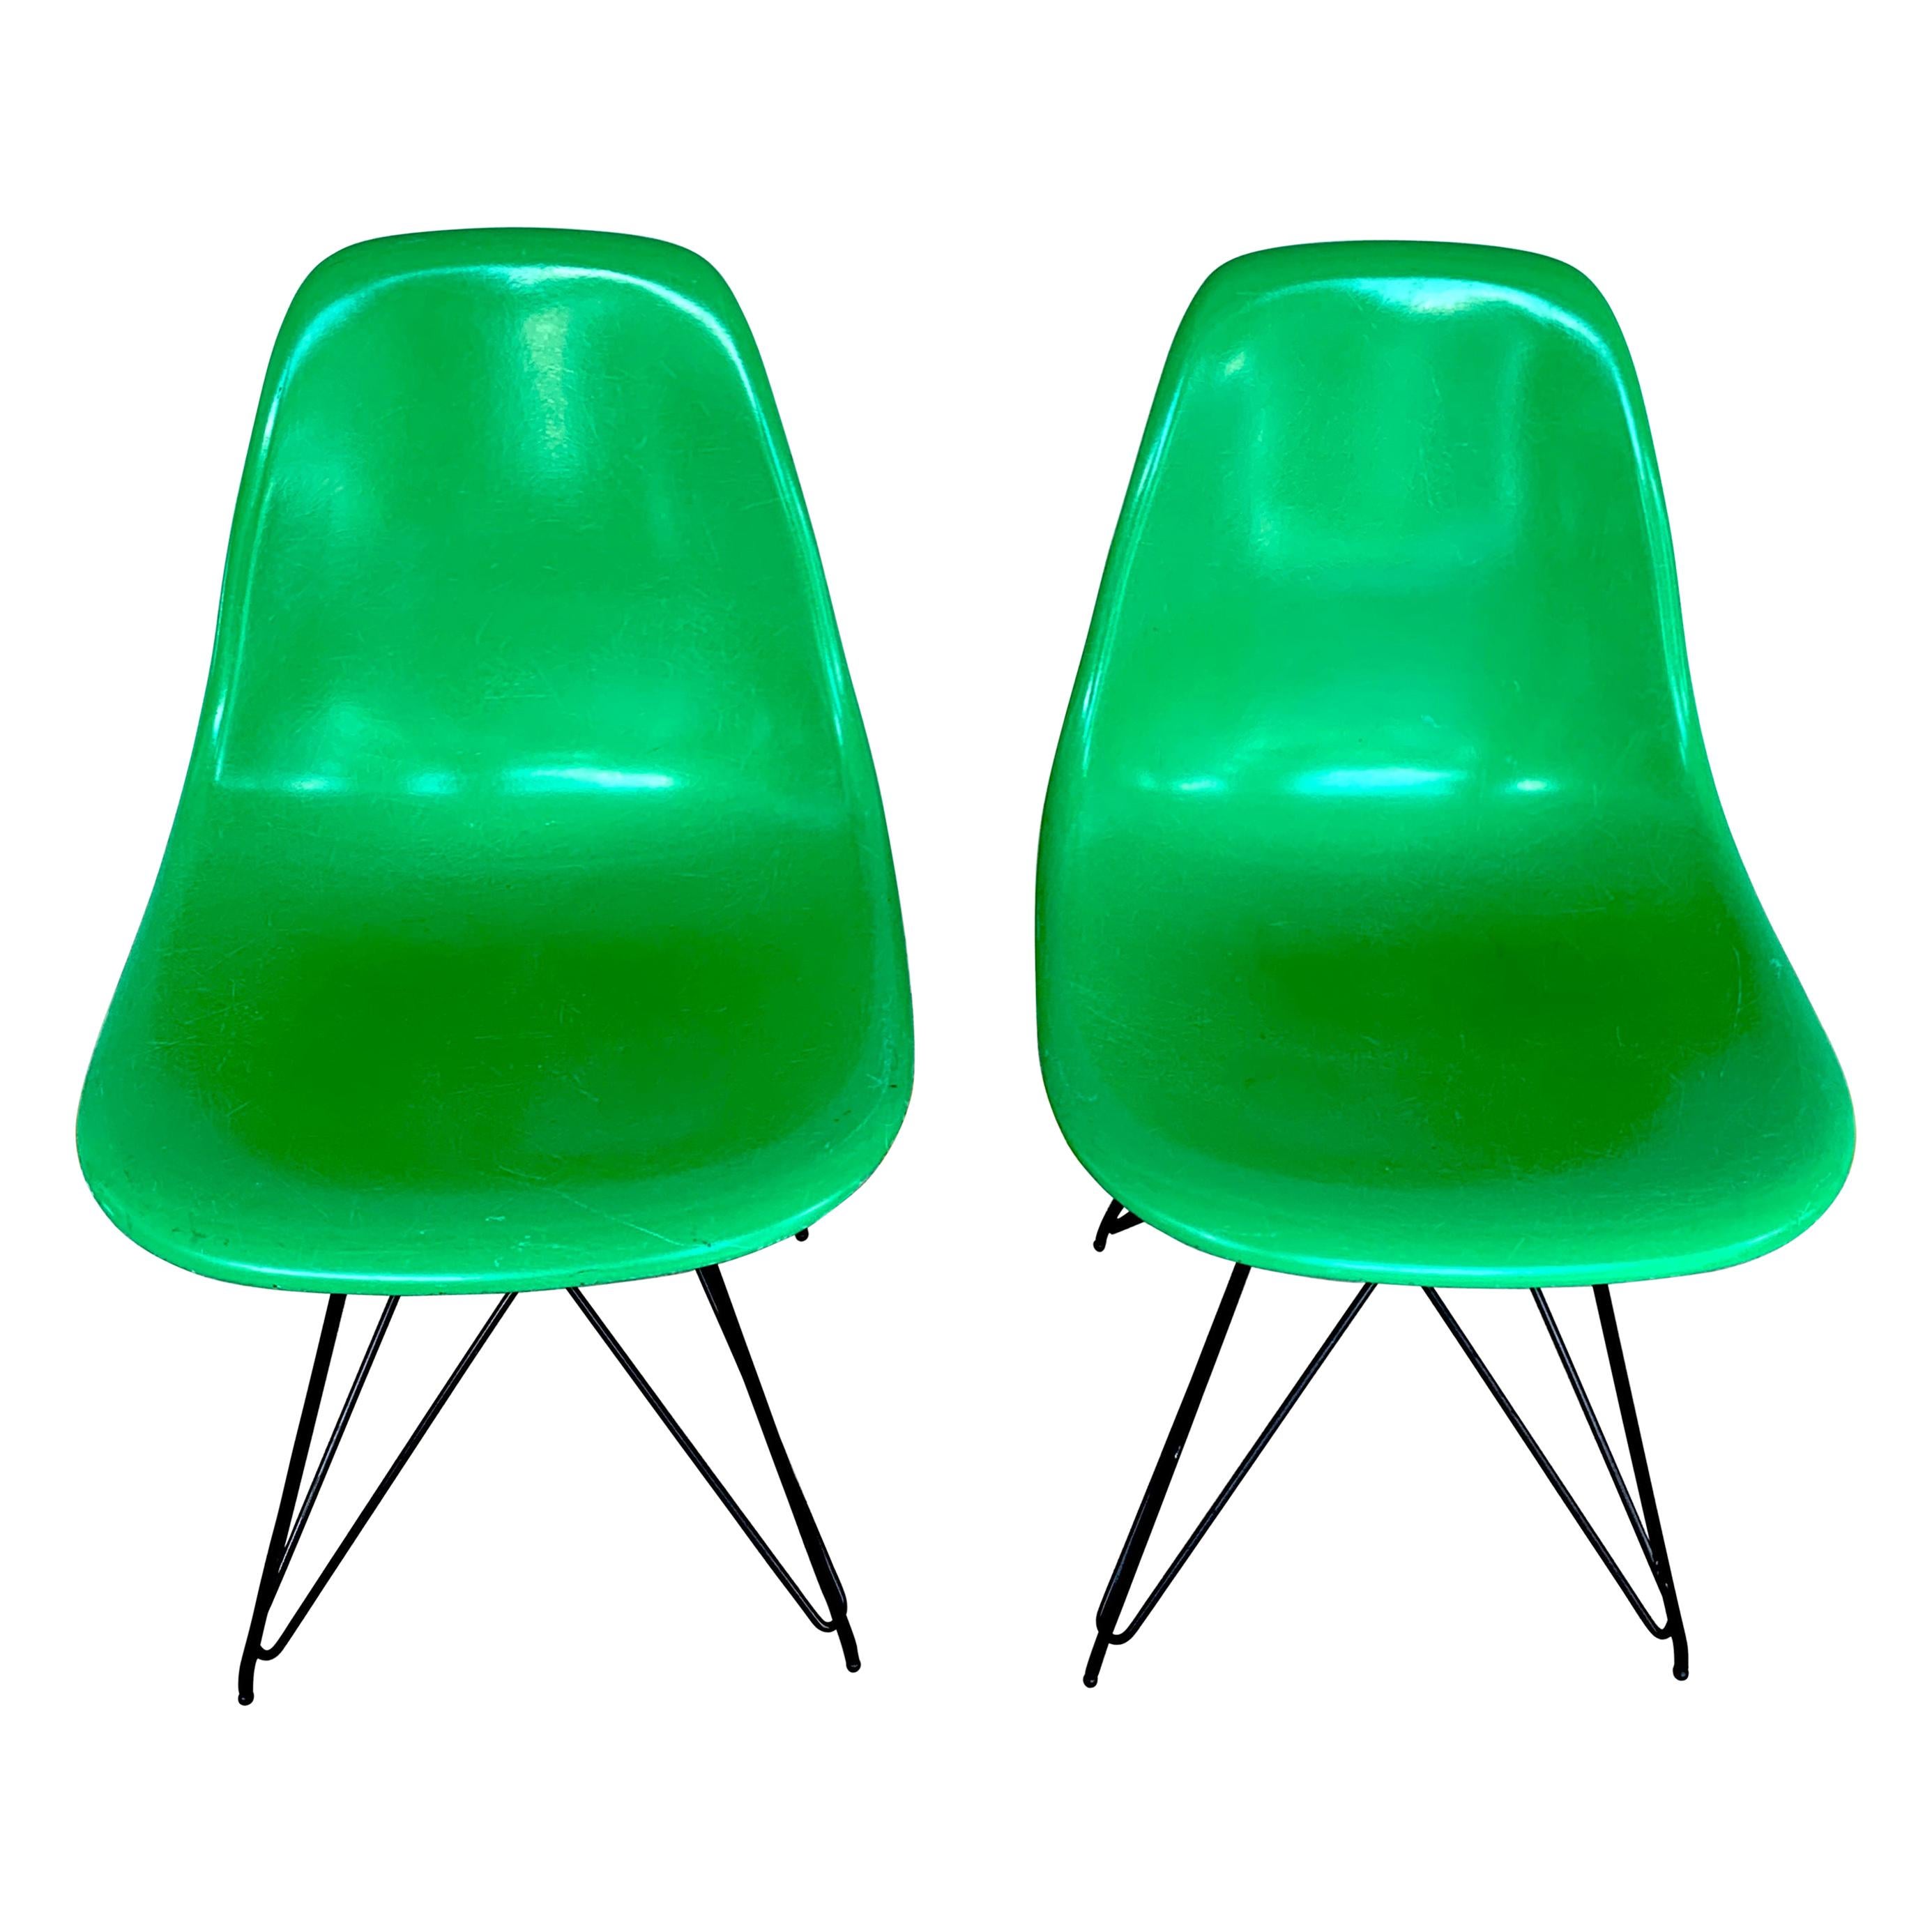 Pair of Herman Miller Eames Eiffel Tower Green Shell Chairs